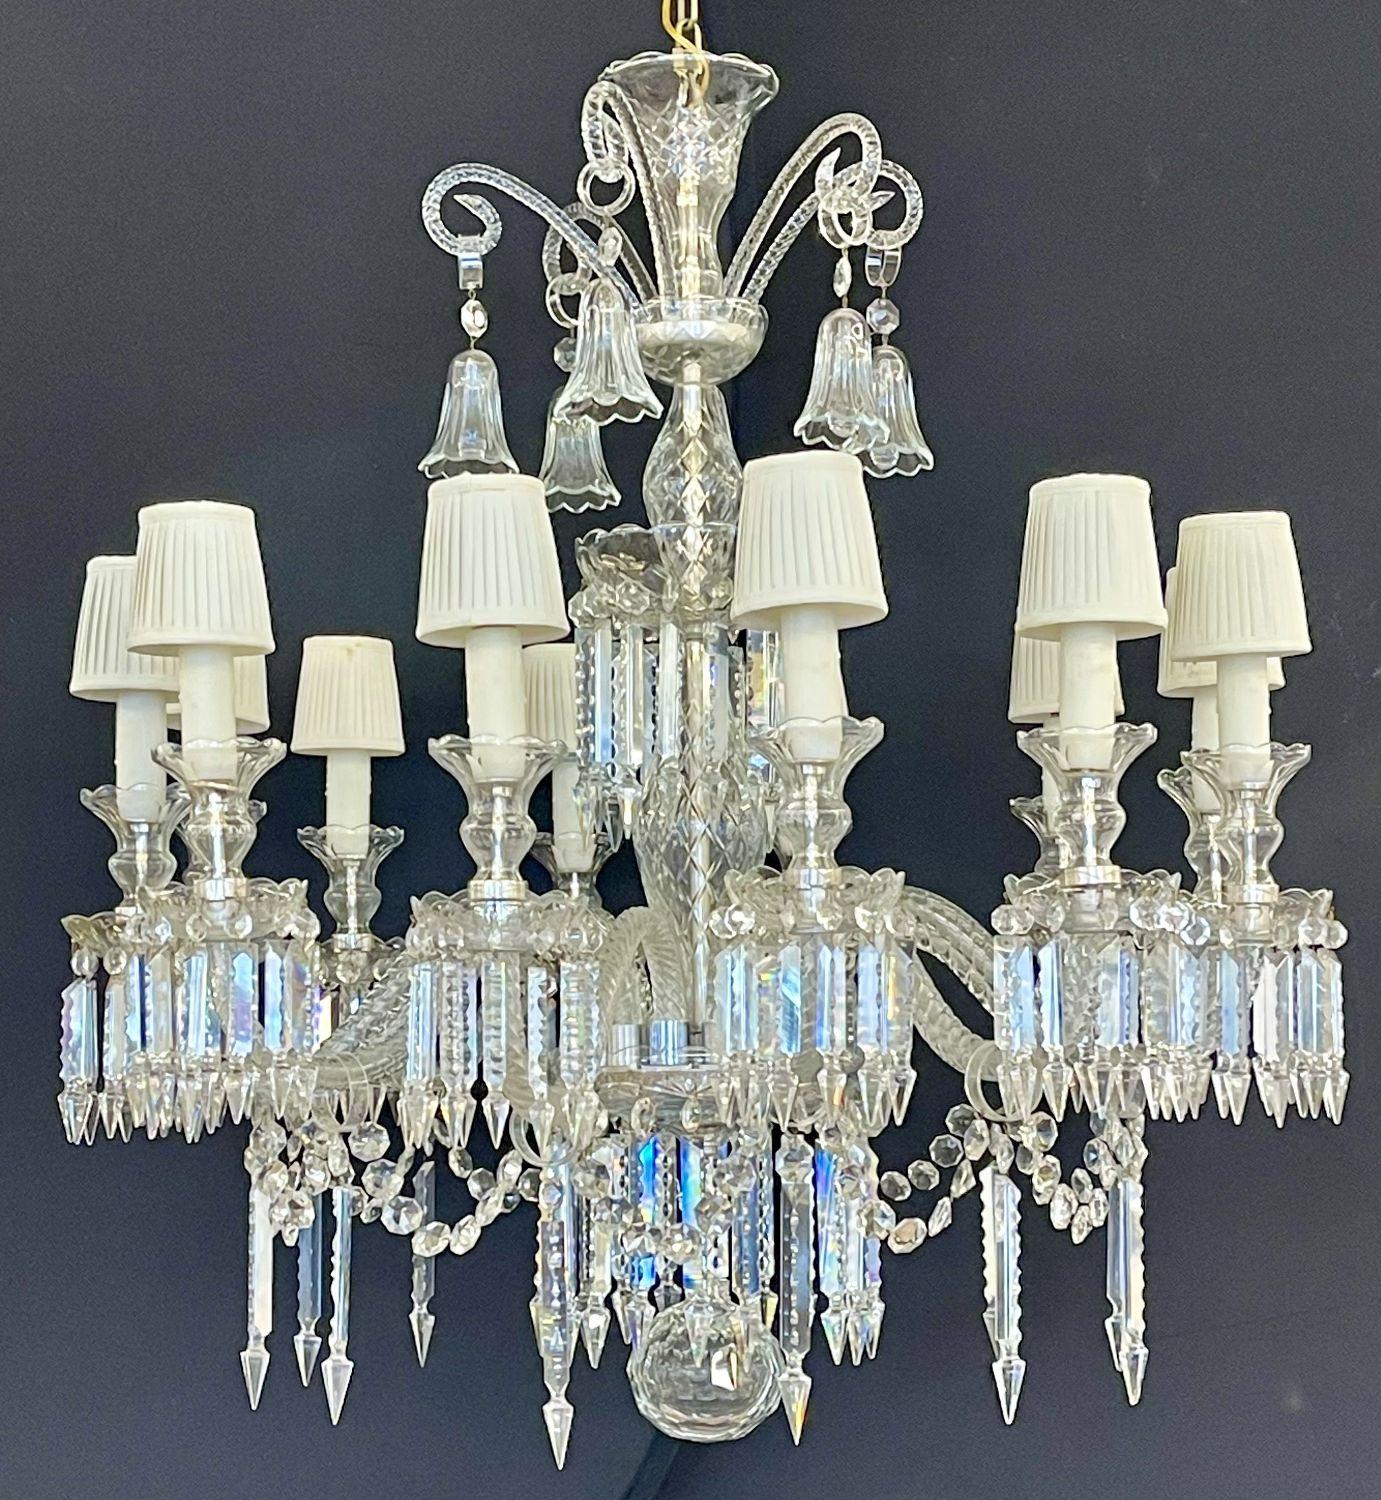 Baccarat style chandelier. A monumental crystal, 12 light chandelier having a center crystal column center with twelve lighted swag arms, terminating in crystal hooks each holding a crystal bell. 7feet of chain and a canopy are included. The larger